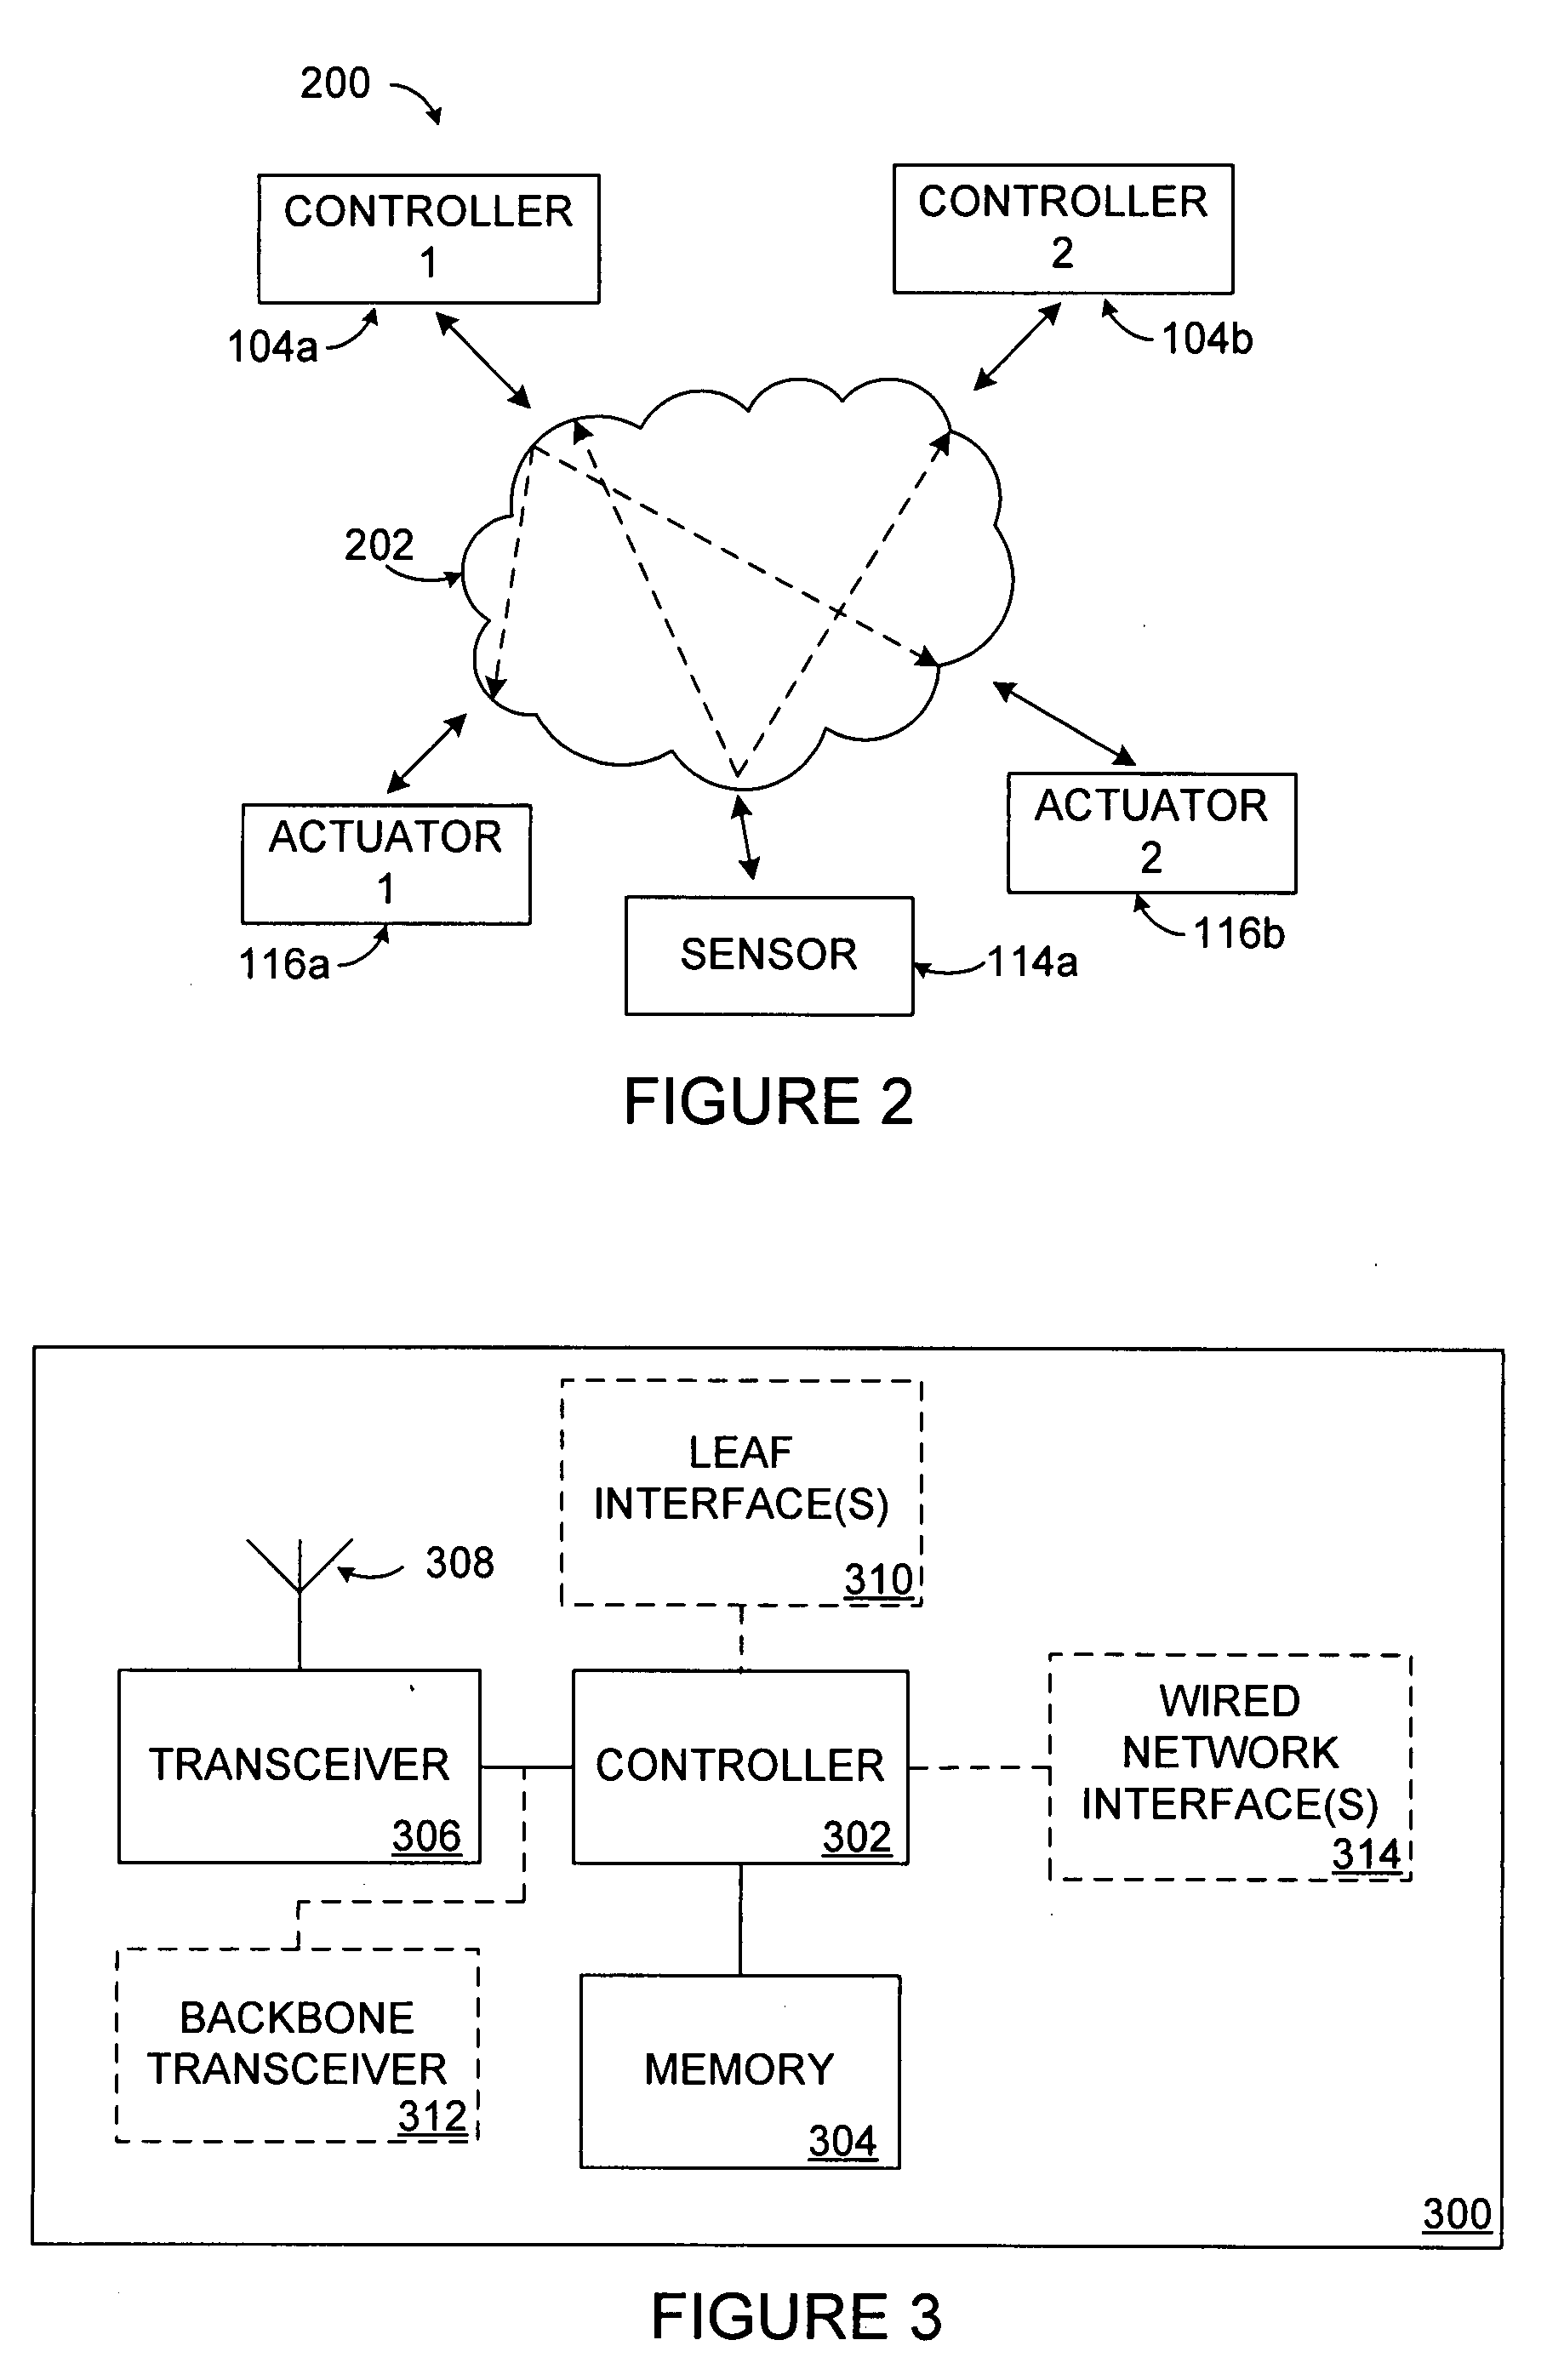 System and method for providing simultaneous connectivity between devices in an industrial control and automation or other system